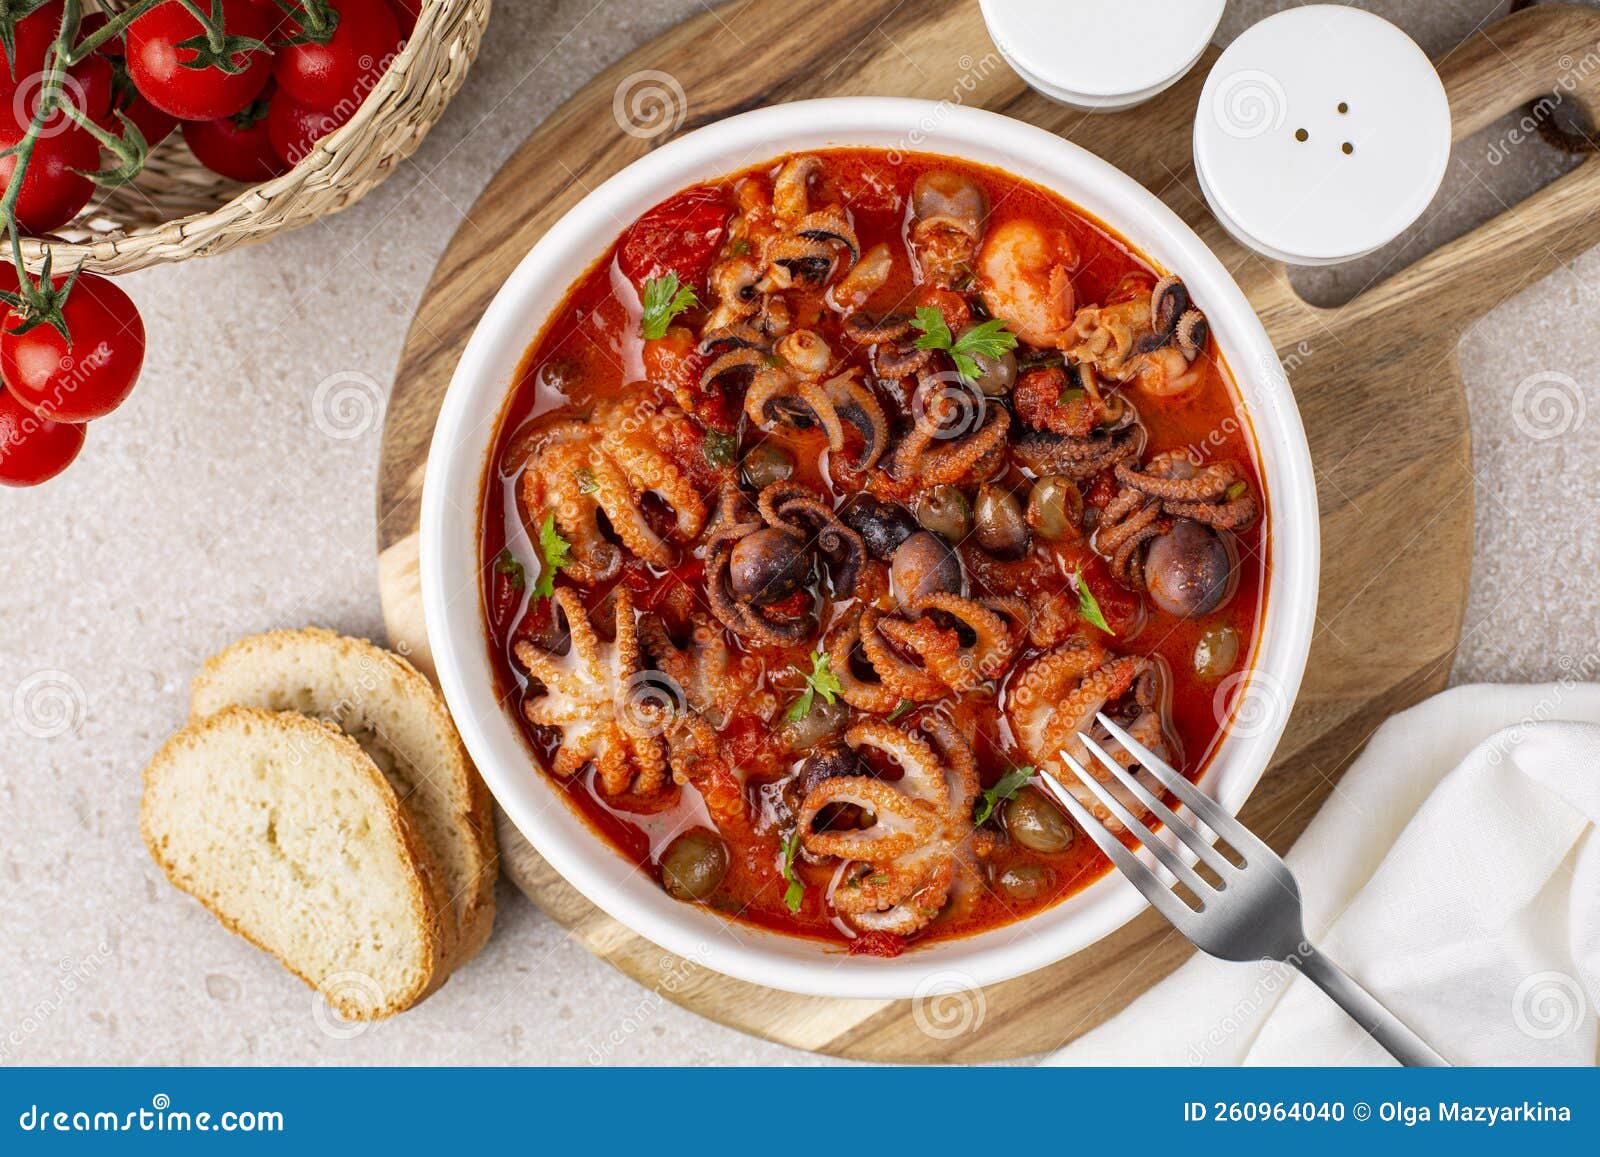 braised octopus stew with tomato sauce